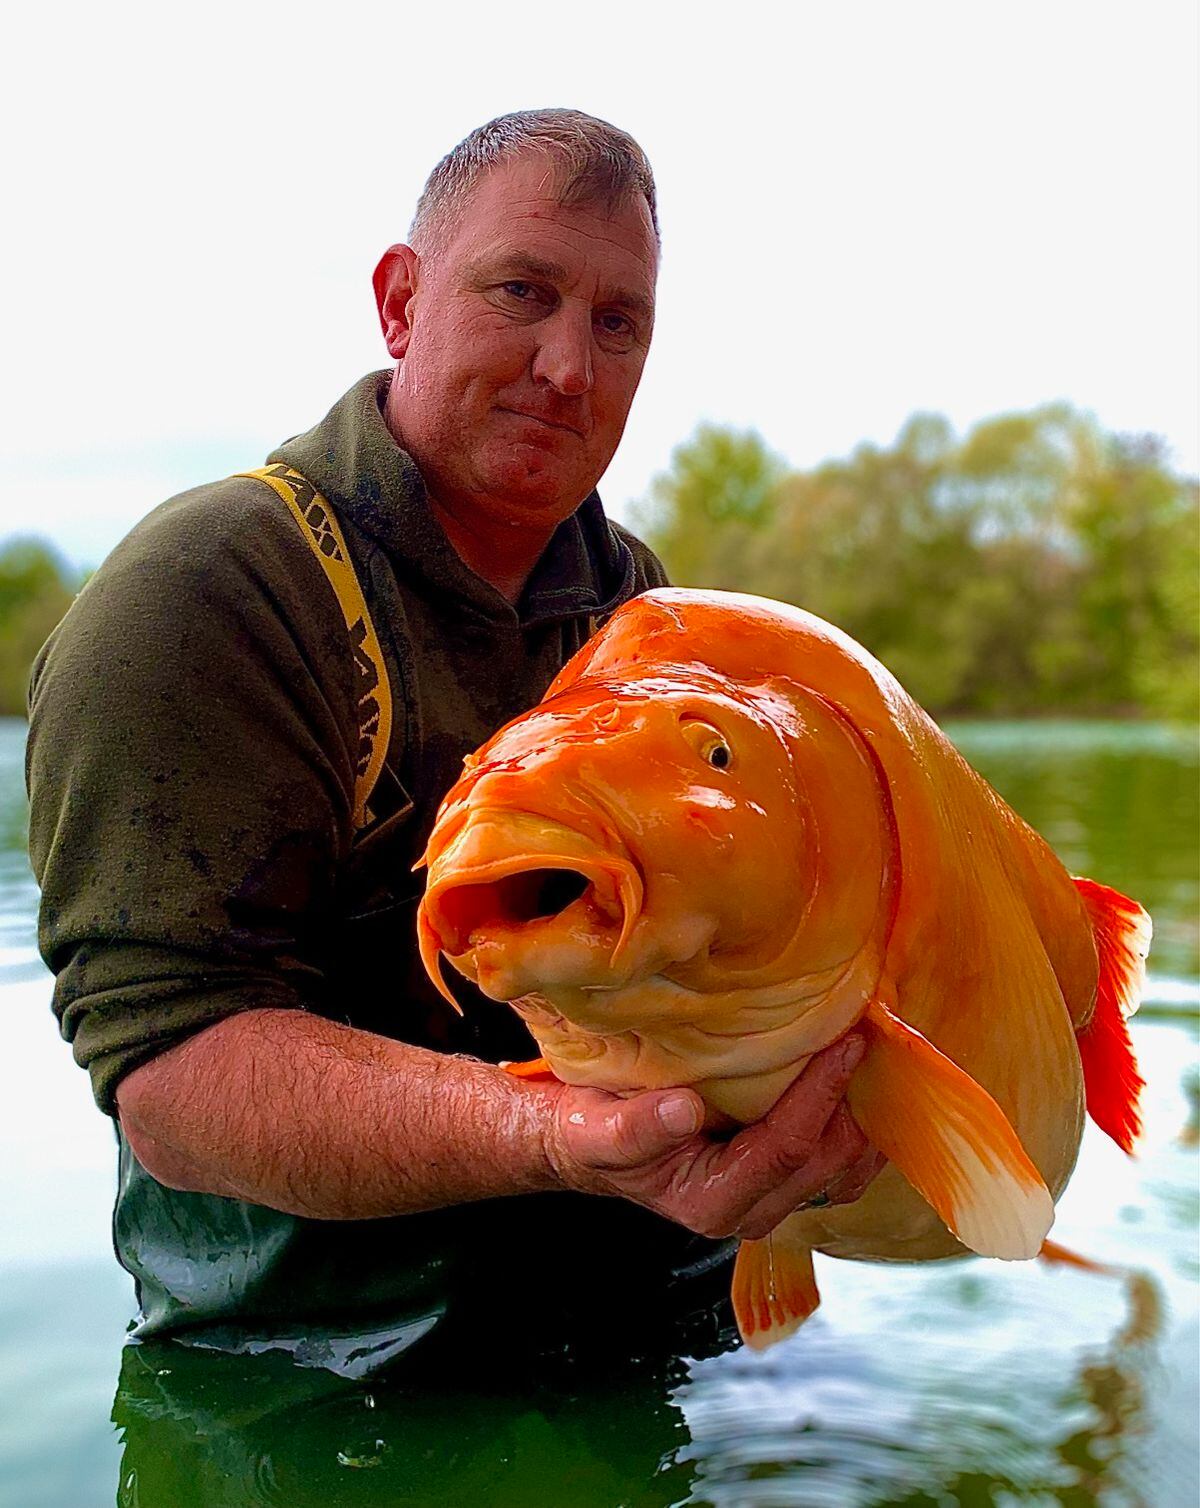 The gigantic orange specimen, aptly nicknamed The Carrot, weighed a whopping 67lbs 4ozs